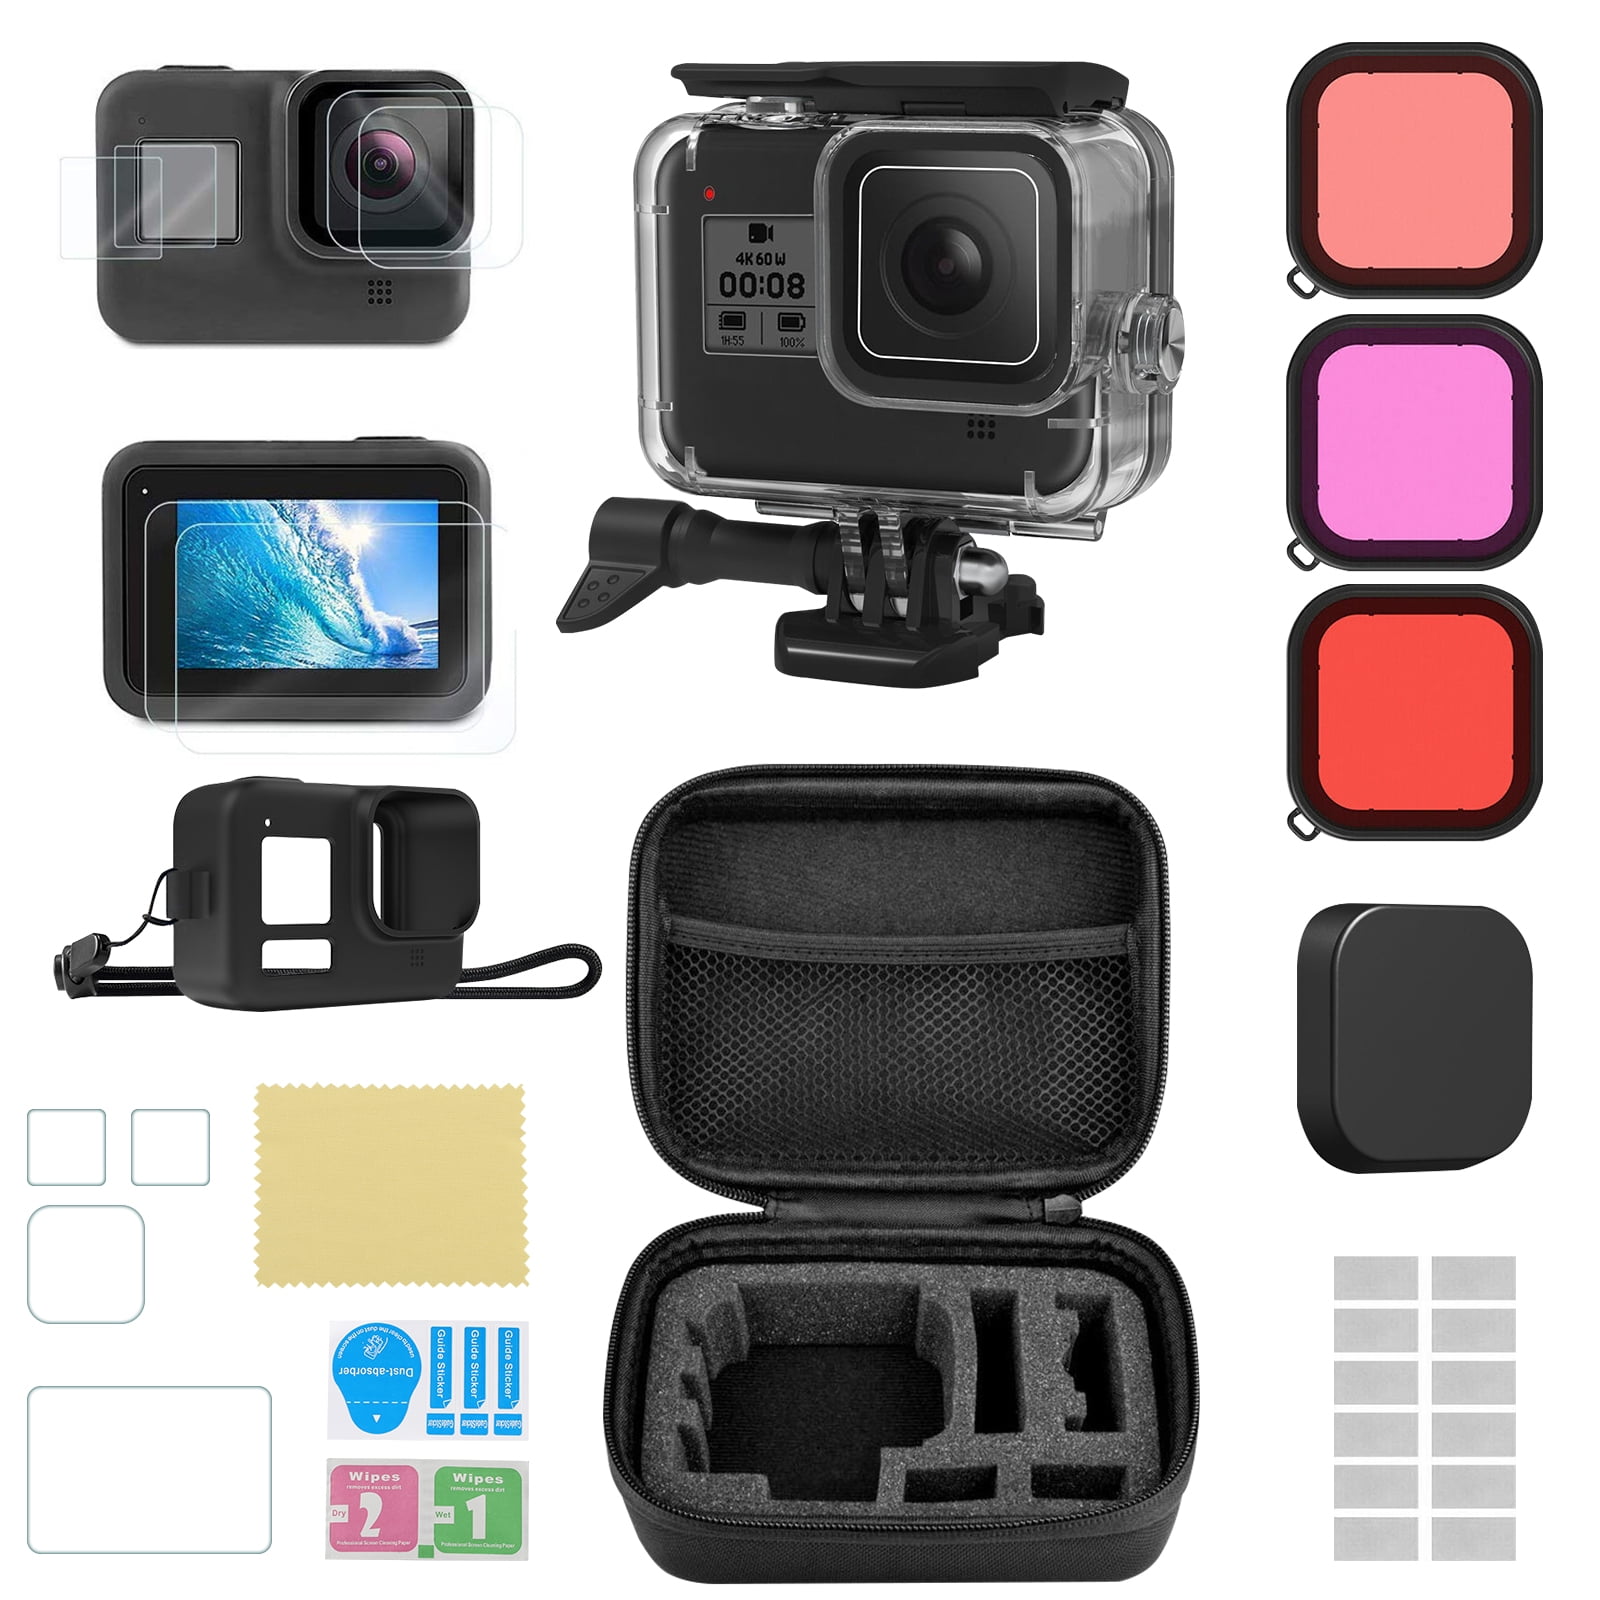 Hard Shell Case With Red Adjustable Partitions Inserts For GoPro Hero+ LCD 